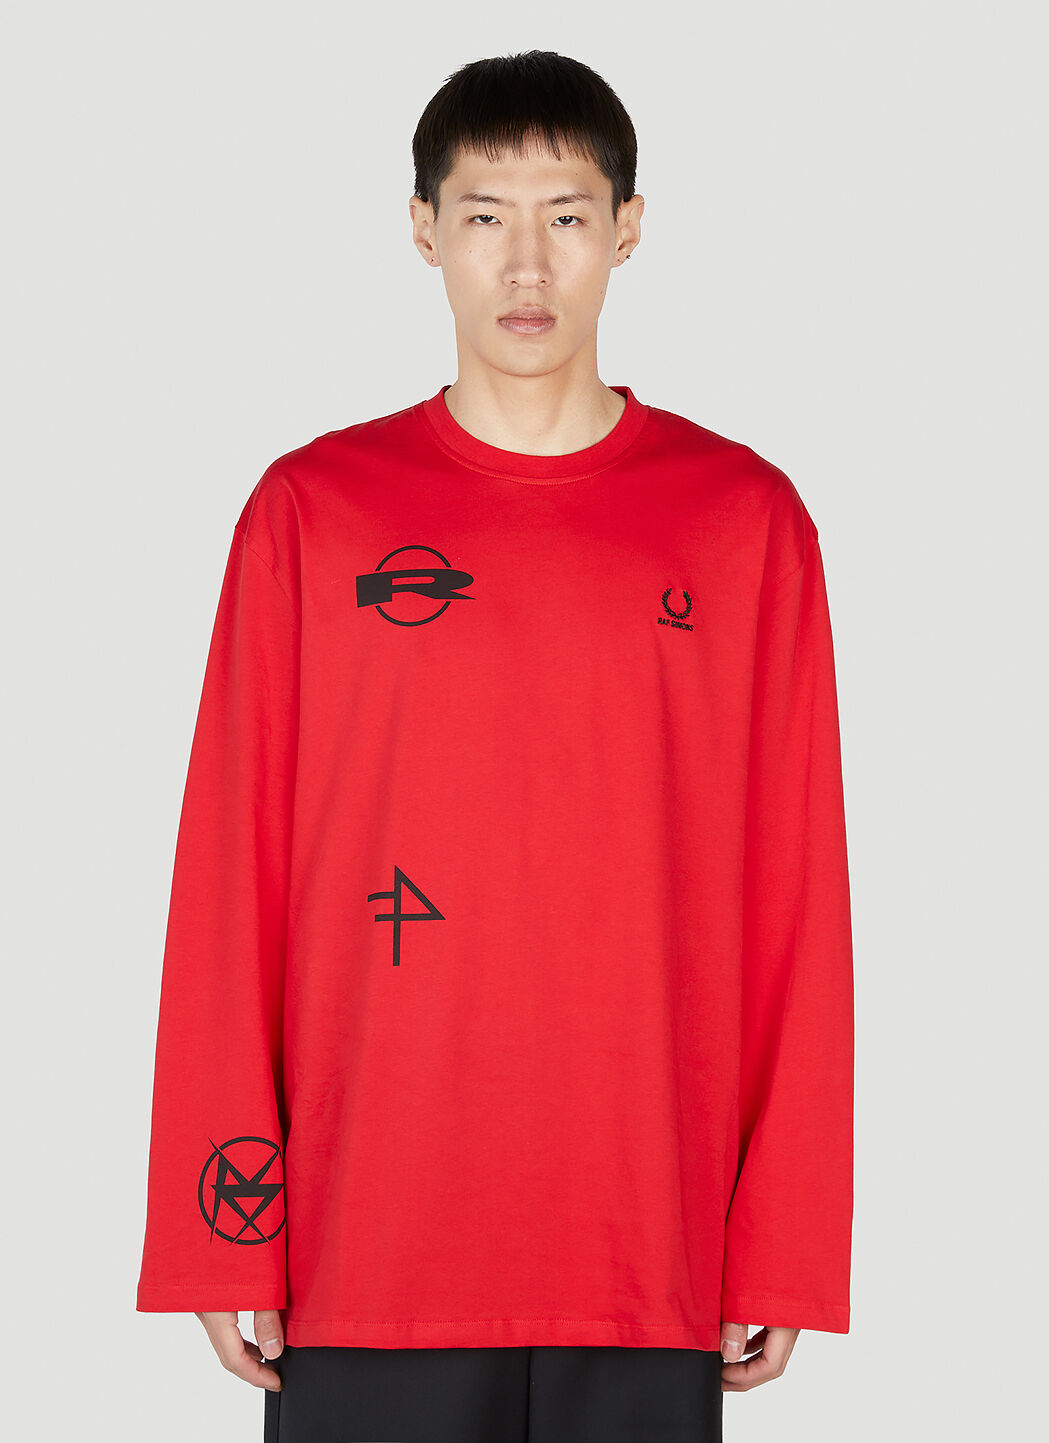 Raf Simons x Fred Perry 印花长袖 T 恤 黑色 rsf0152009